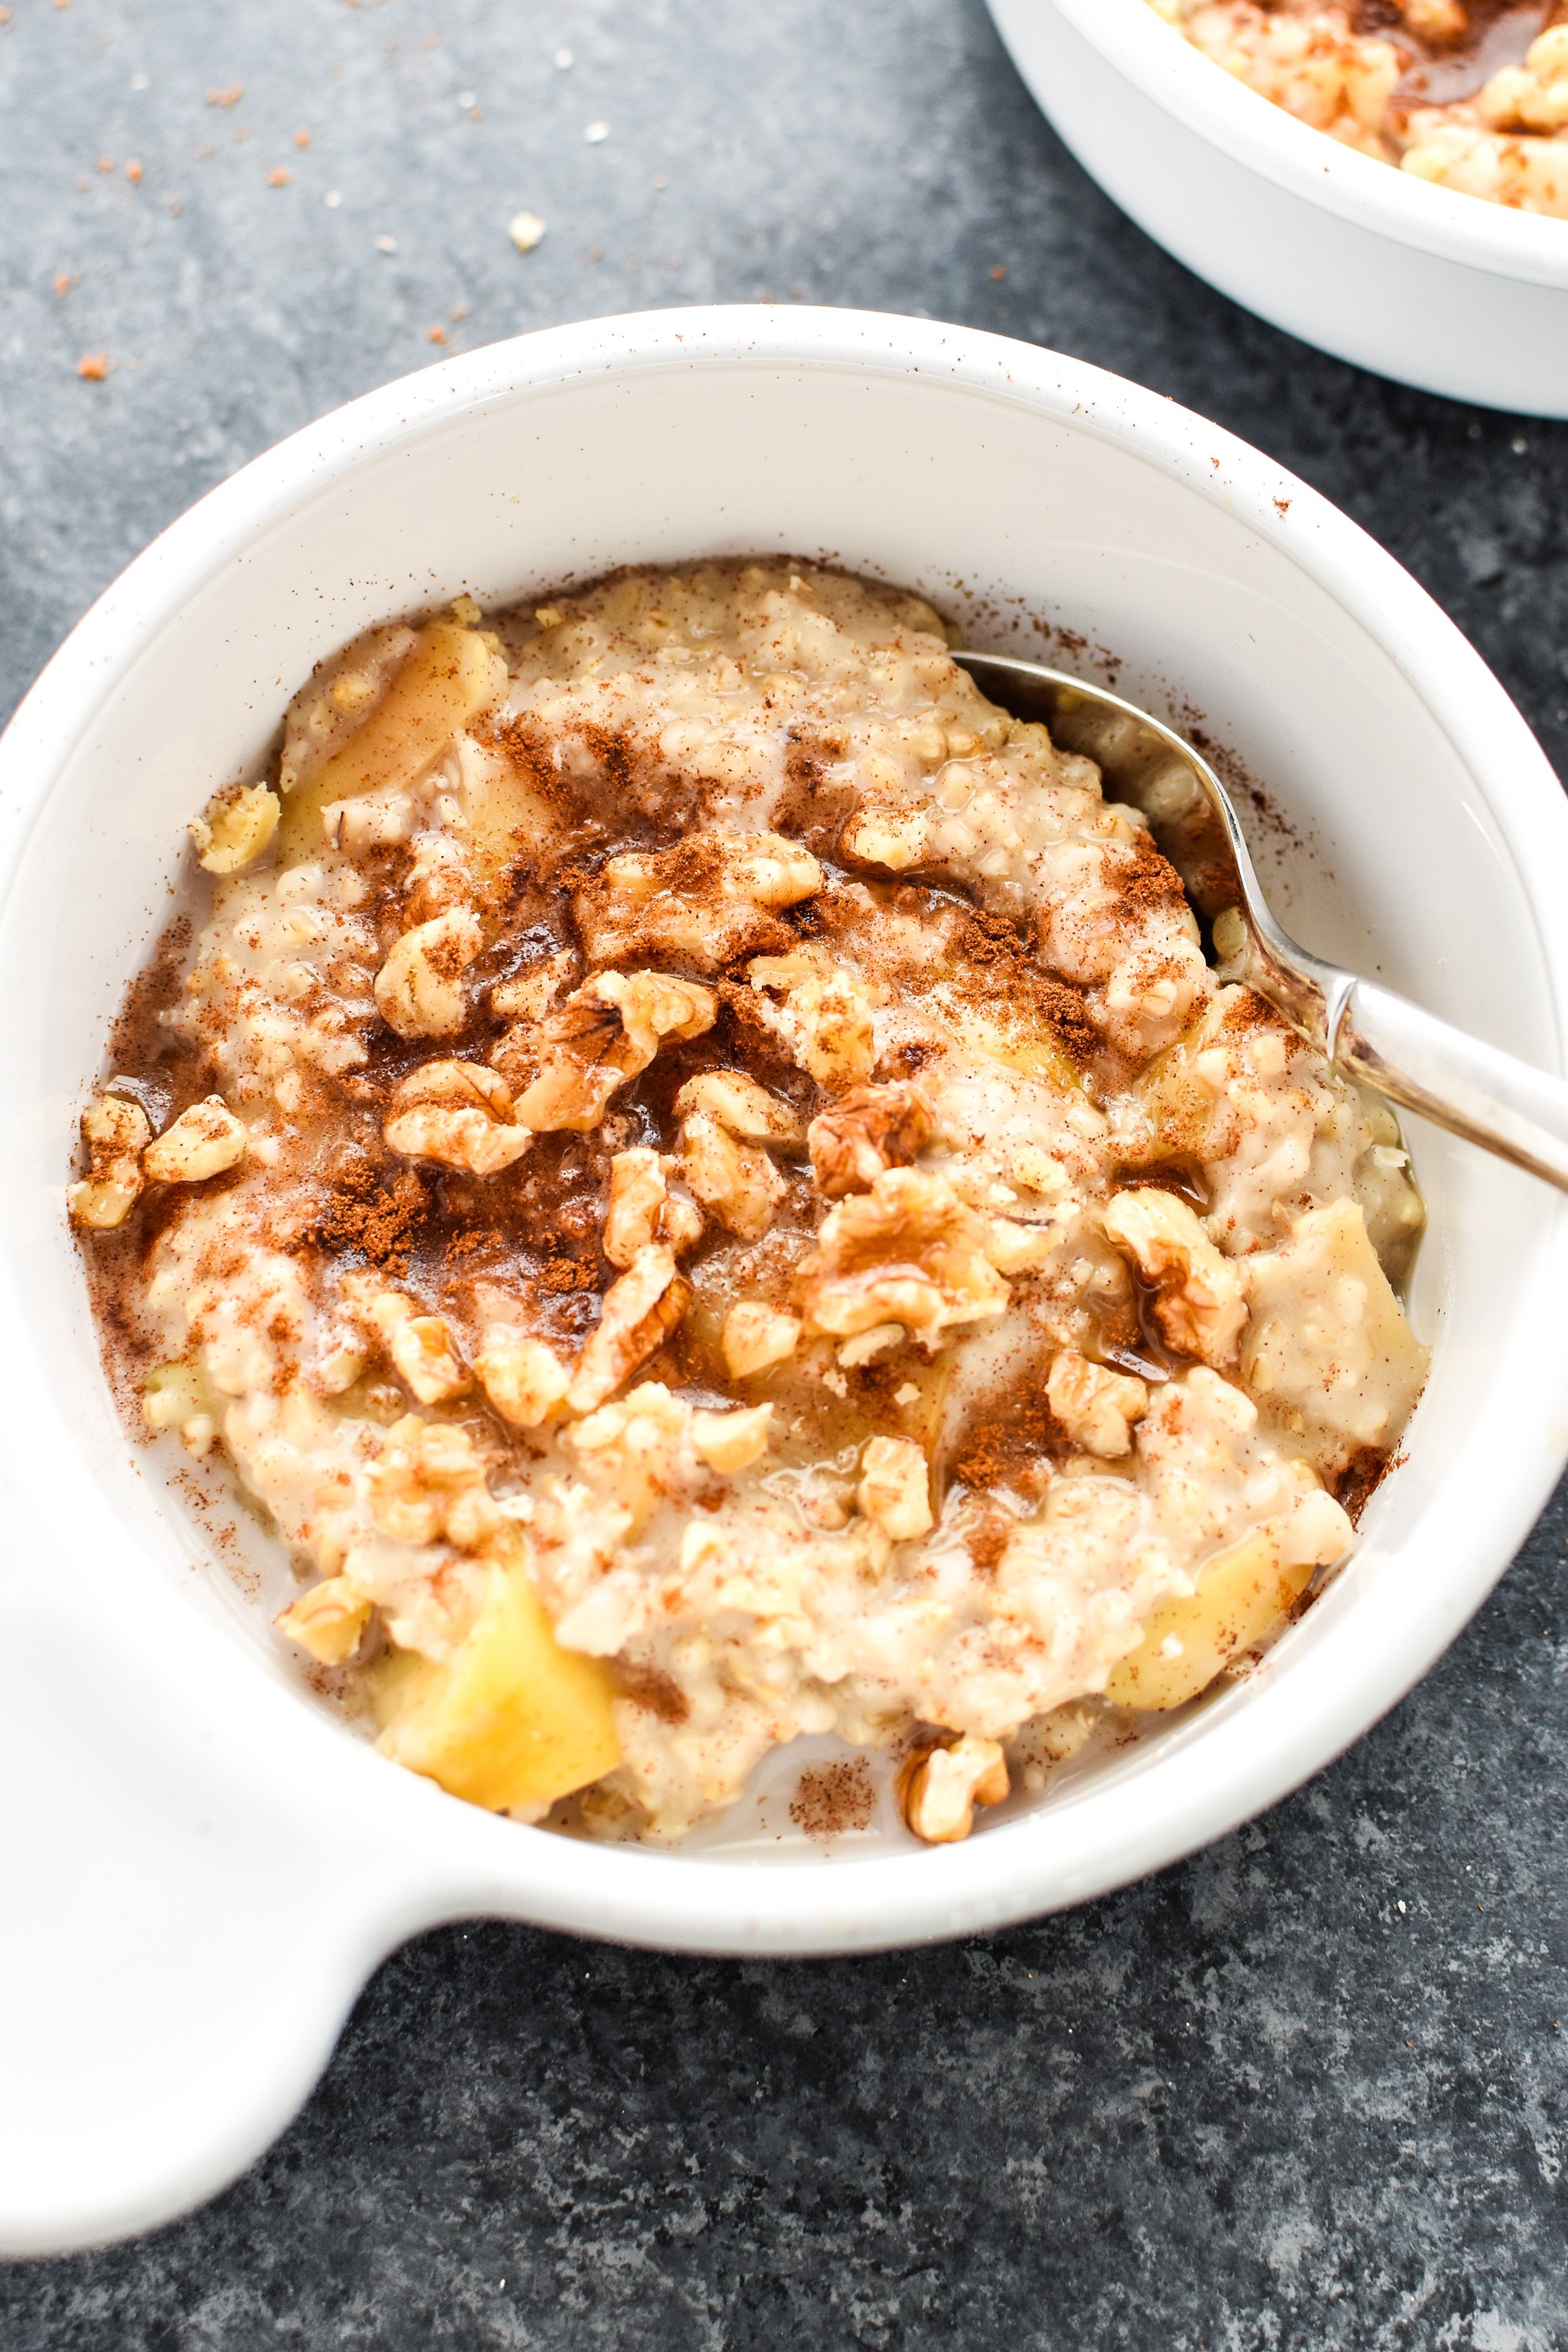 A bowl of cooked oatmeal with apples, cinnamon and walnuts.